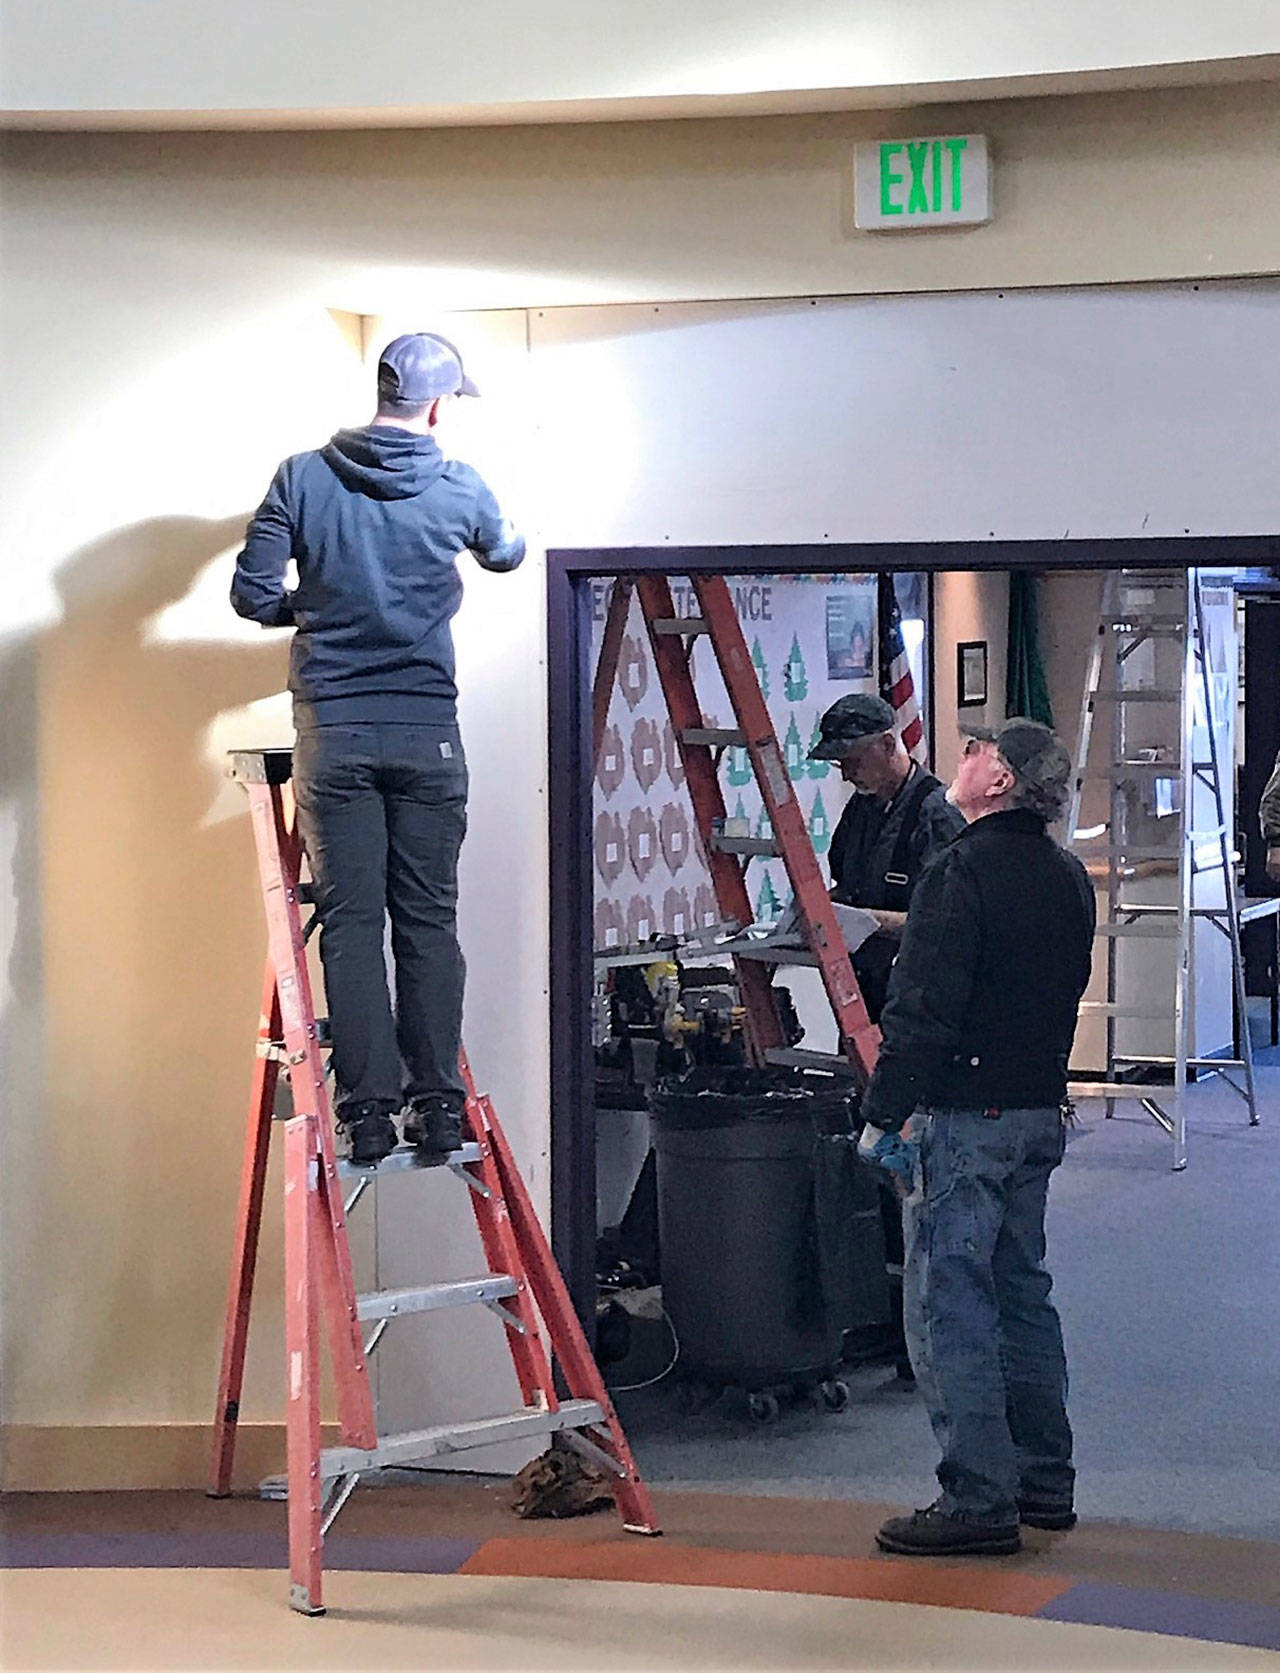 A Port Angeles School District maintenance crew works on installing controlled access to a school entry. From left are Josh Winters on the ladder and Ron Erdmann in front with Bob Anderson in back. (Nolan Duce/Port Angeles School District)